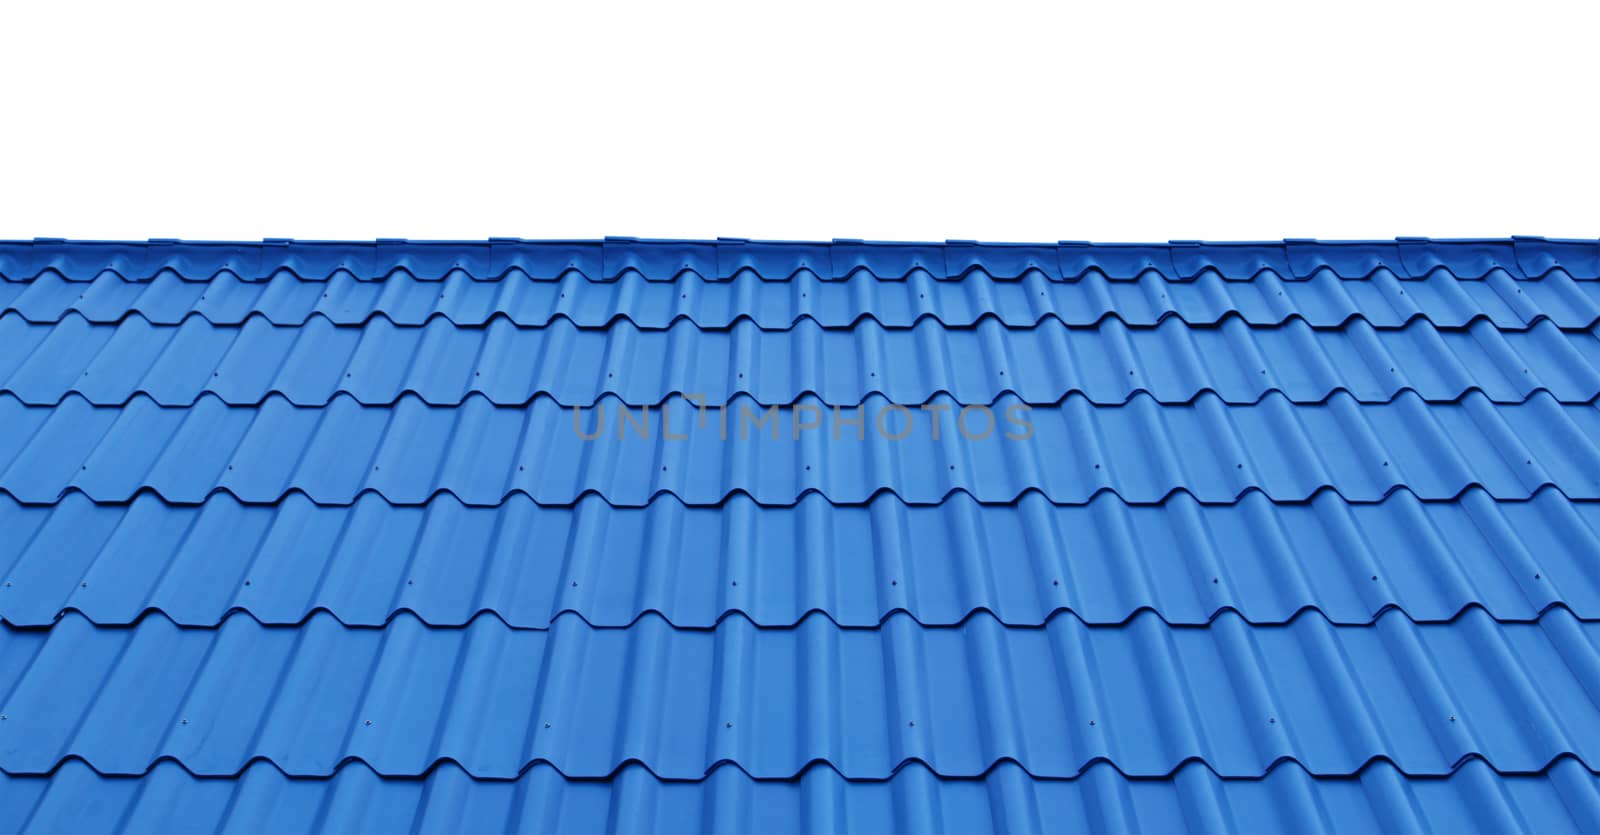 Blue Roof